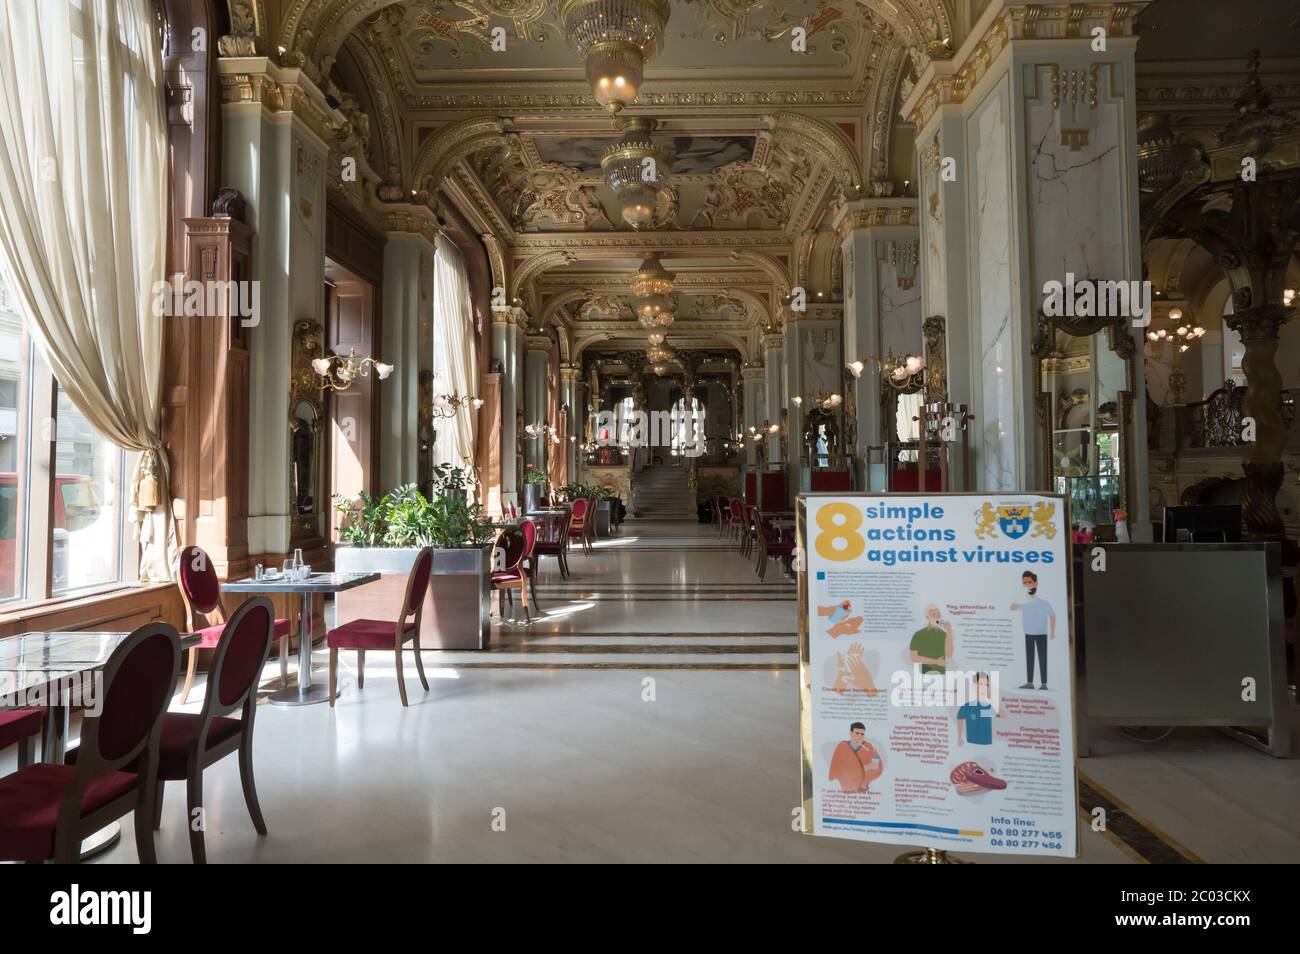 (200611) -- BUDAPEST, June 11, 2020 (Xinhua) -- Photo taken on June 10, 2020 shows the interior of reopened New York Cafe in Budapest, Hungary. Customers are allowed to enter the inside of cafe bars as the novel coronavirus pandemic has subsided and the COVID-19 restrictions were gradually lifted in Hungary. (Photo by Attila Volgyi/Xinhua) Stock Photo